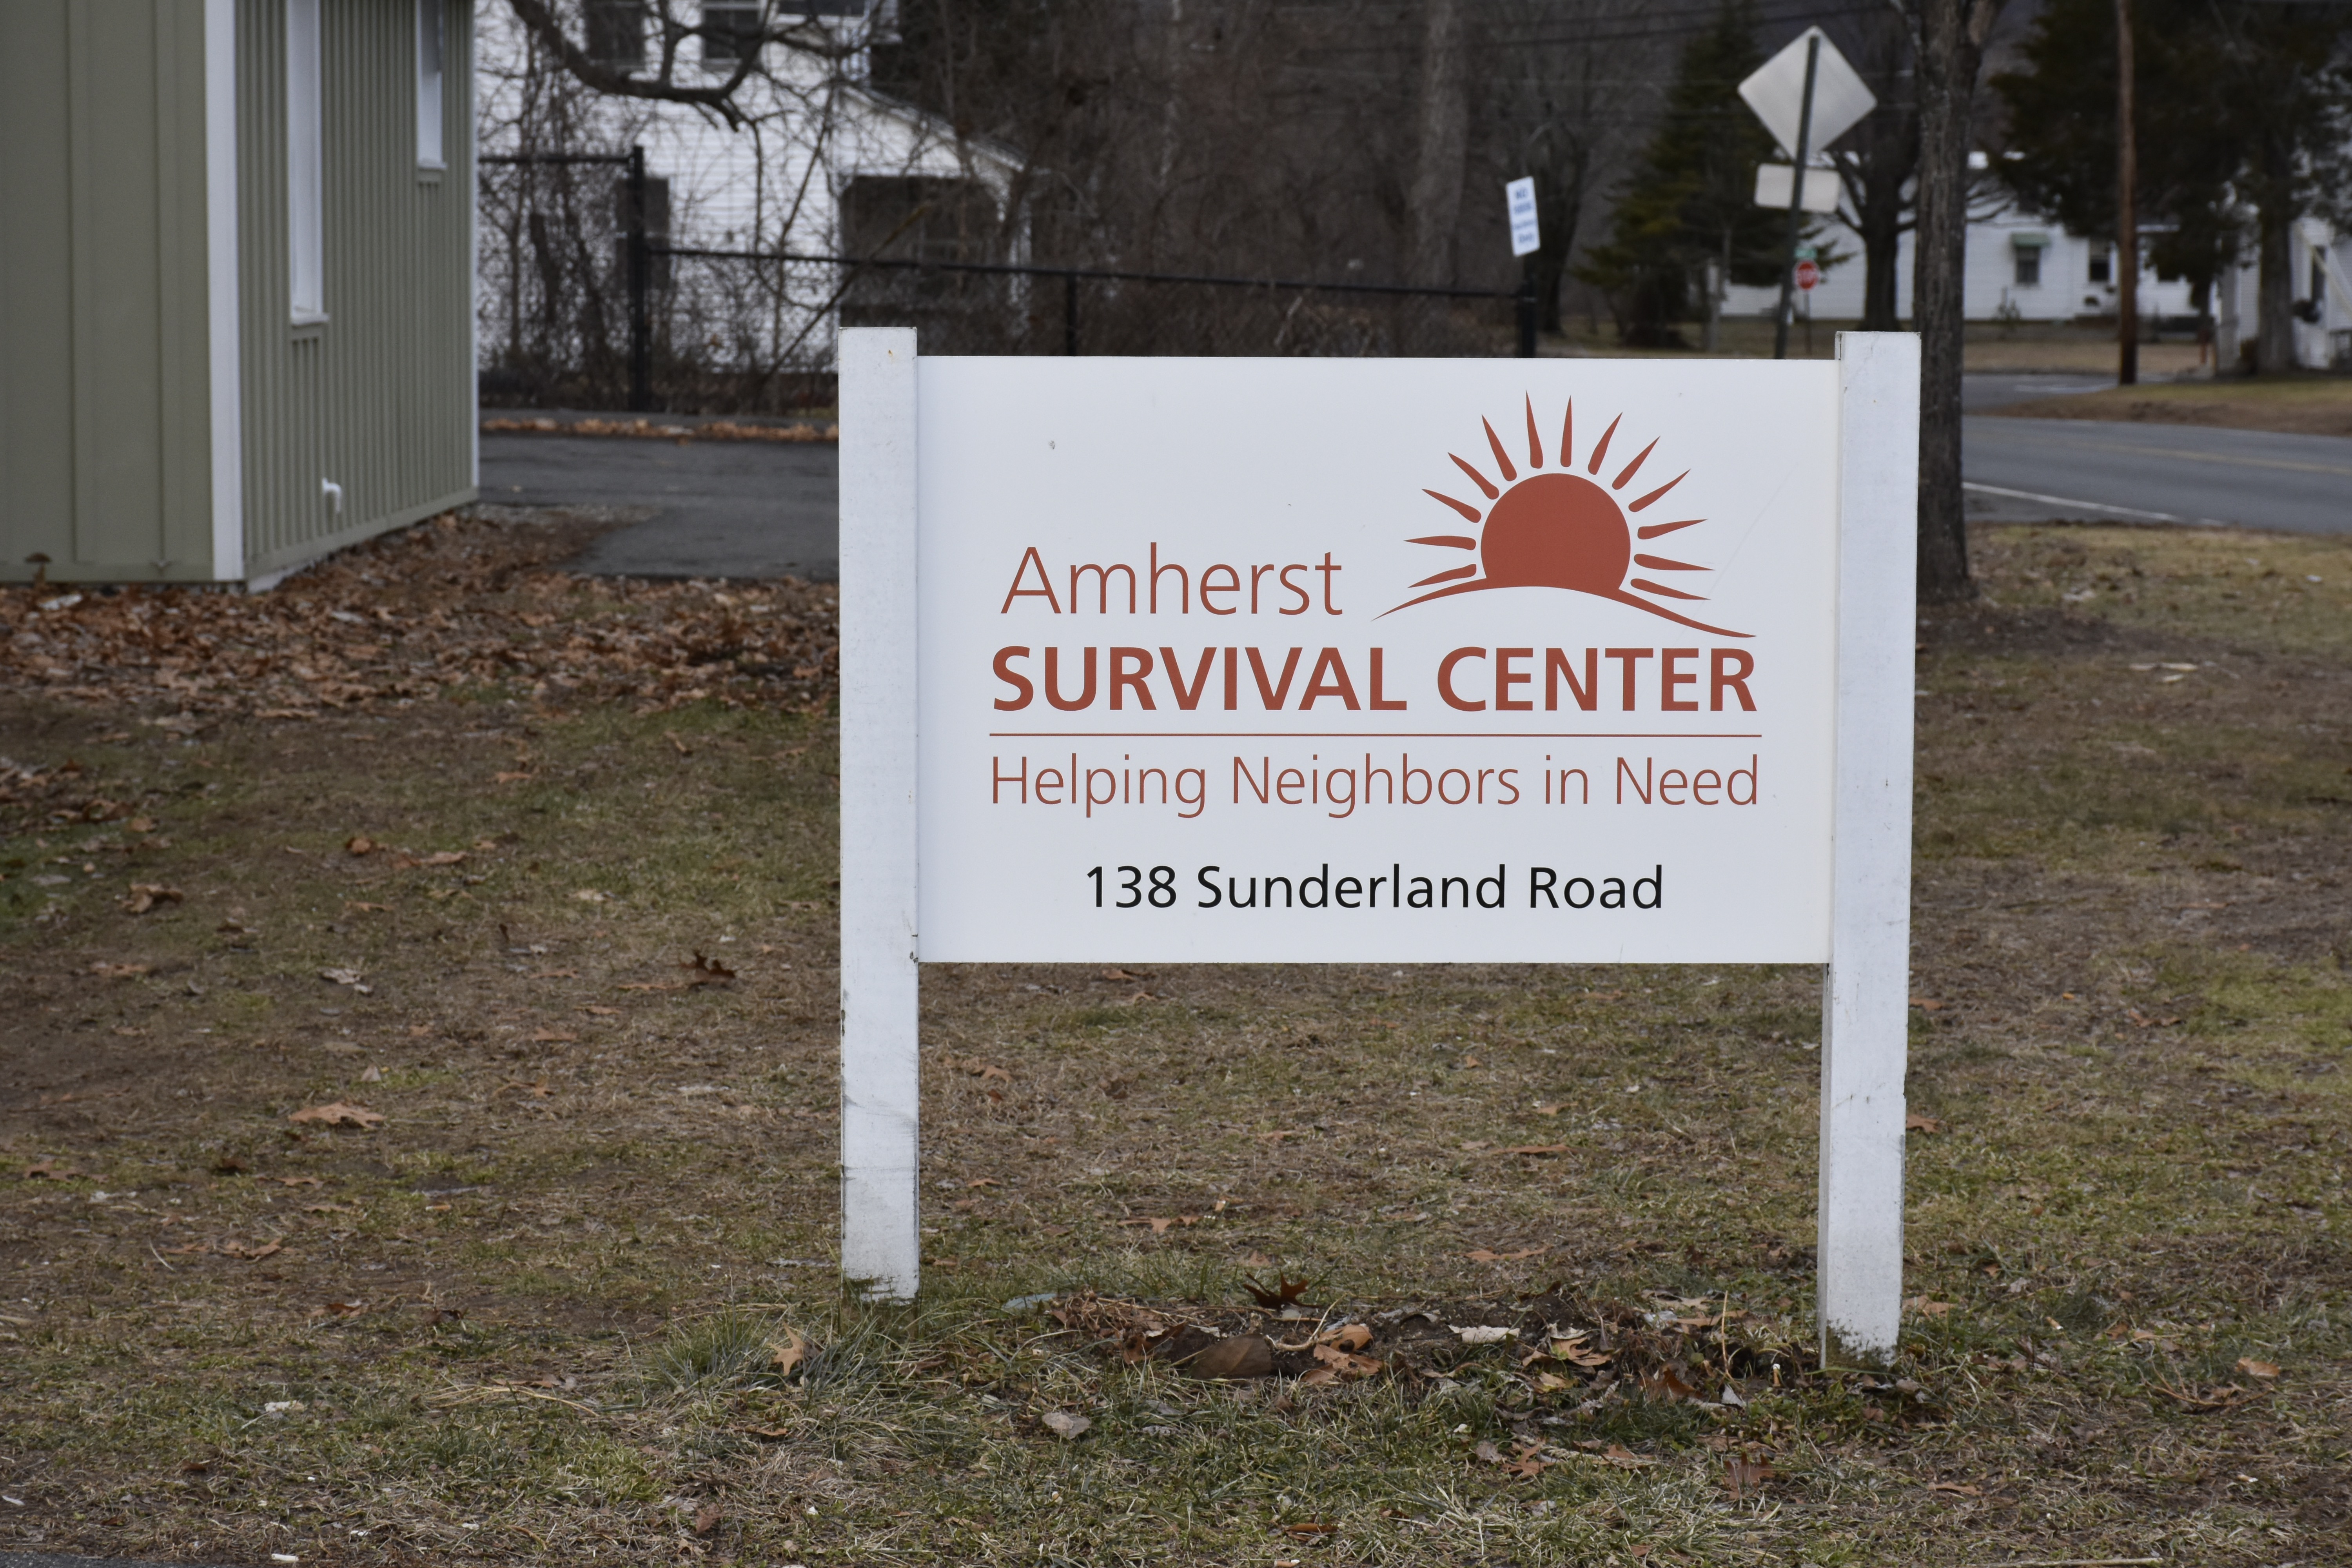 A FEW QUESTIONS FOR LEV BEN-EZRA, DIRECTOR OF THE AMHERST SURVIVAL CENTER -  Amherst Indy